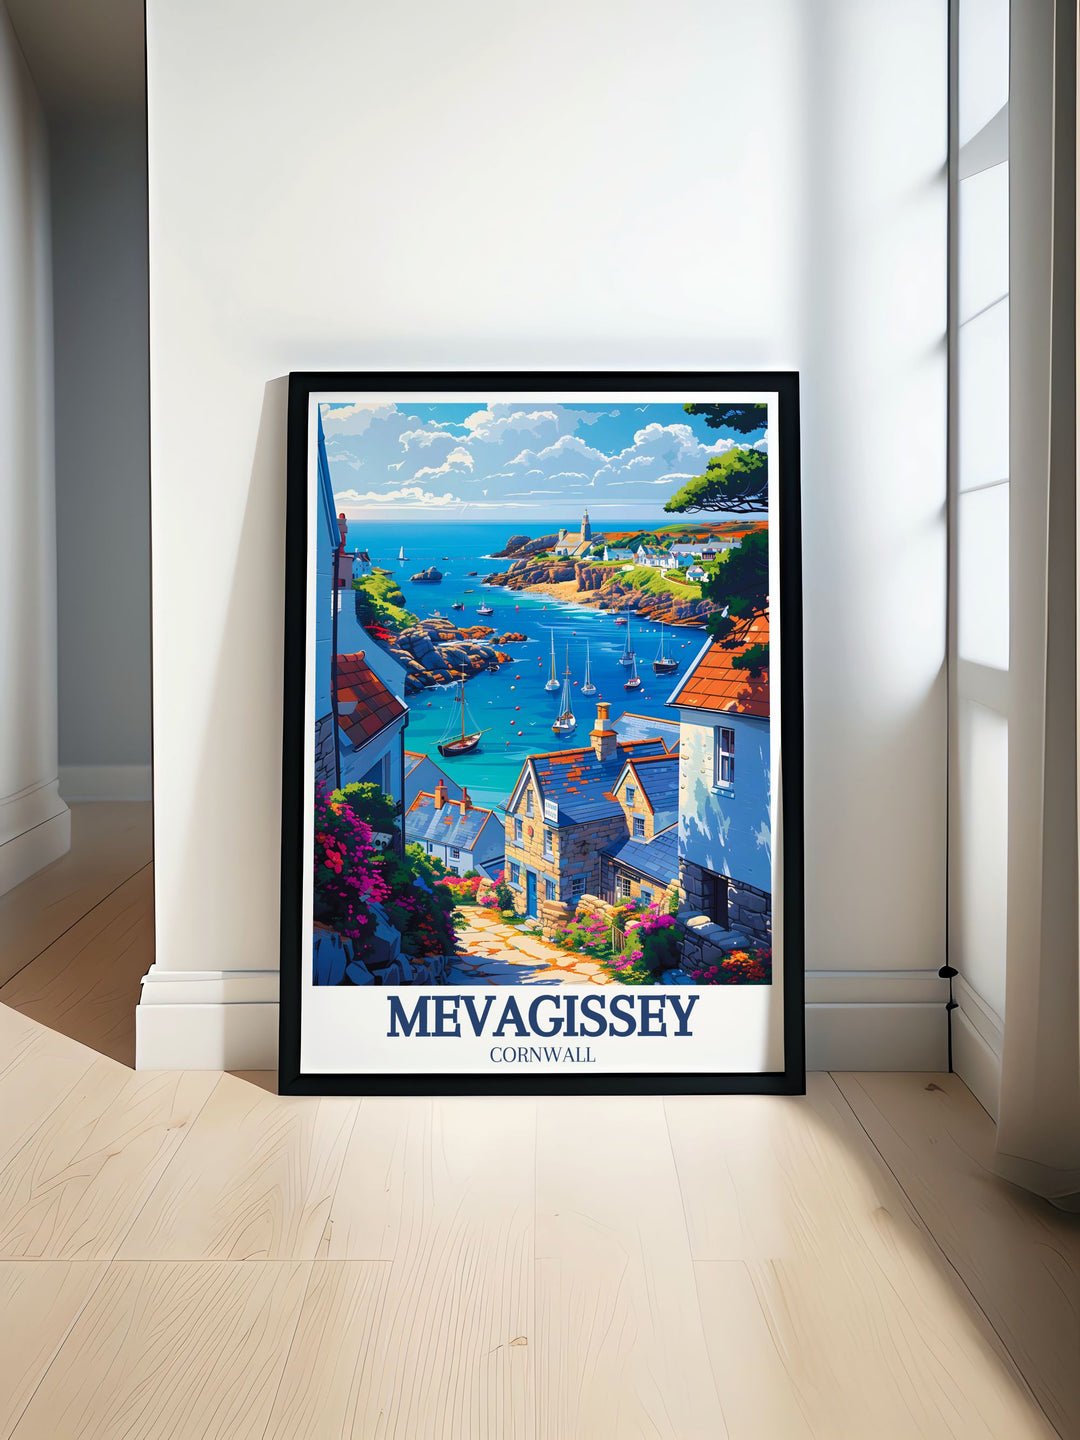 Featuring the rich history of Mevagissey, this travel poster highlights the significance of its iconic landmarks like the Clock Tower and St. Peters Church. Perfect for history buffs and those who love preserved heritage, this artwork brings the timeless charm of Mevagissey into your decor.